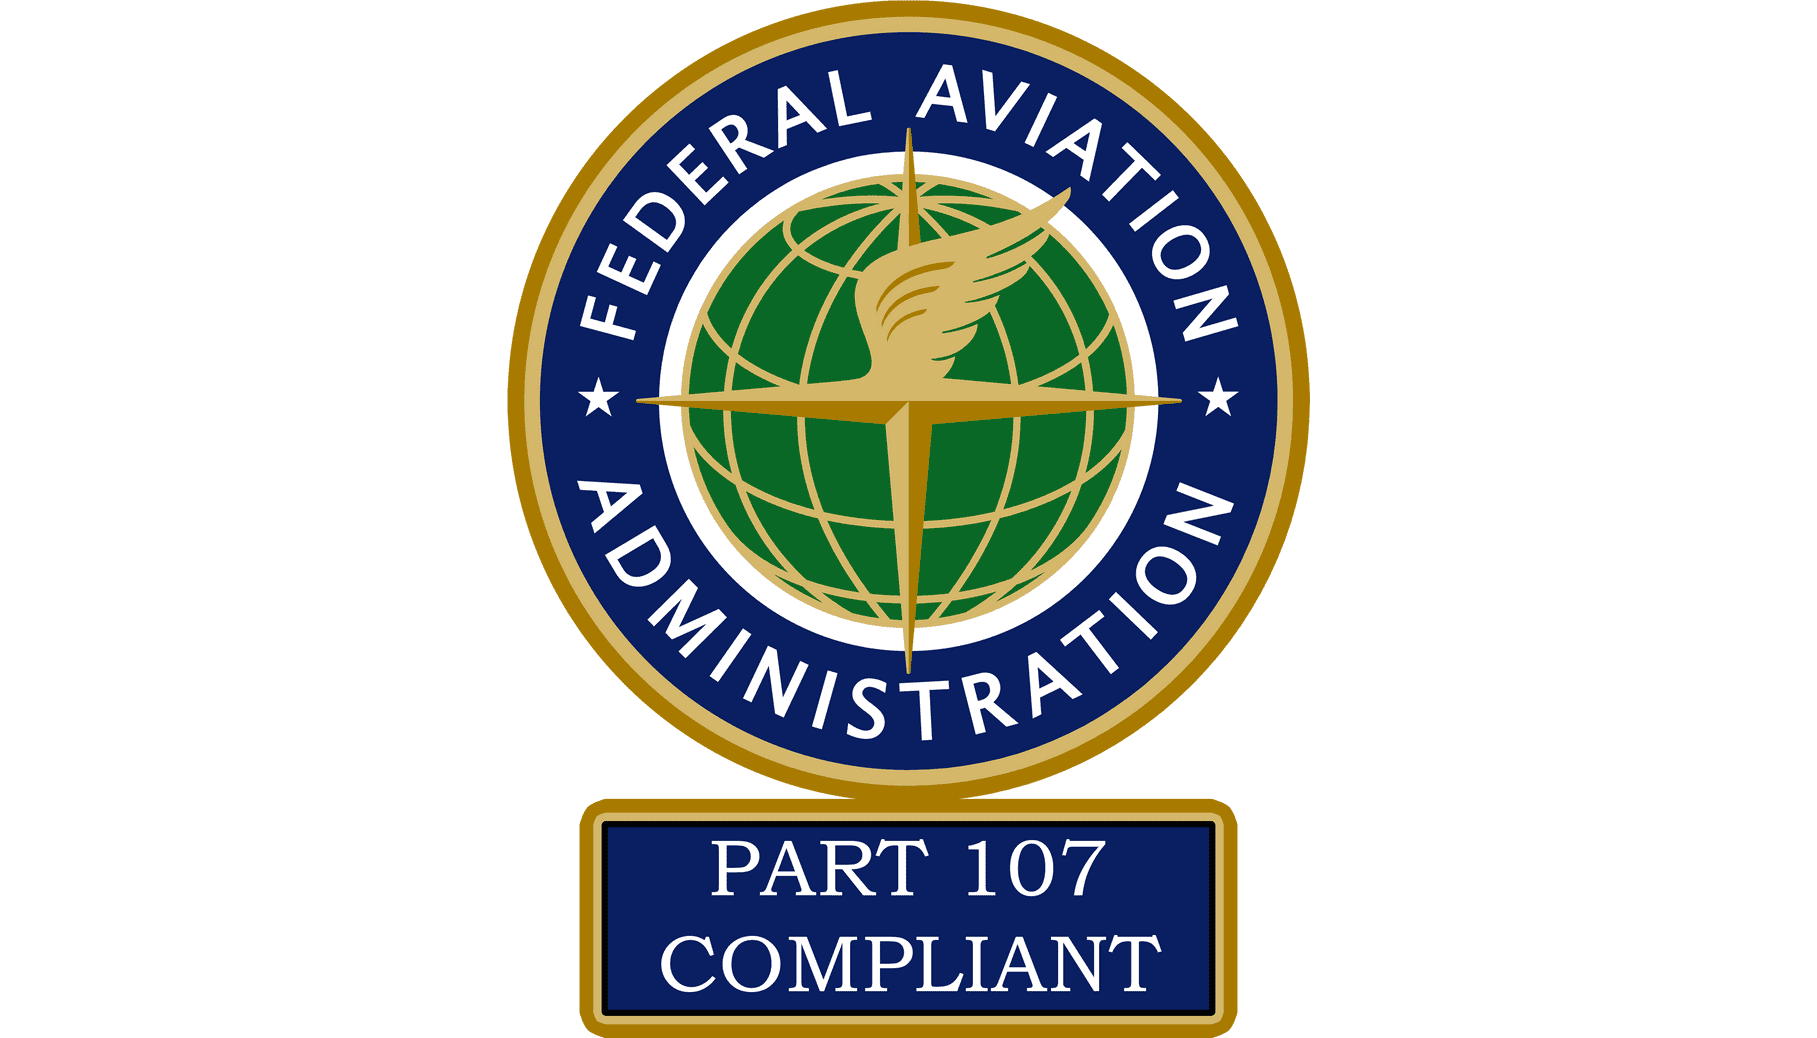 federal aviation administration part 107 compliant